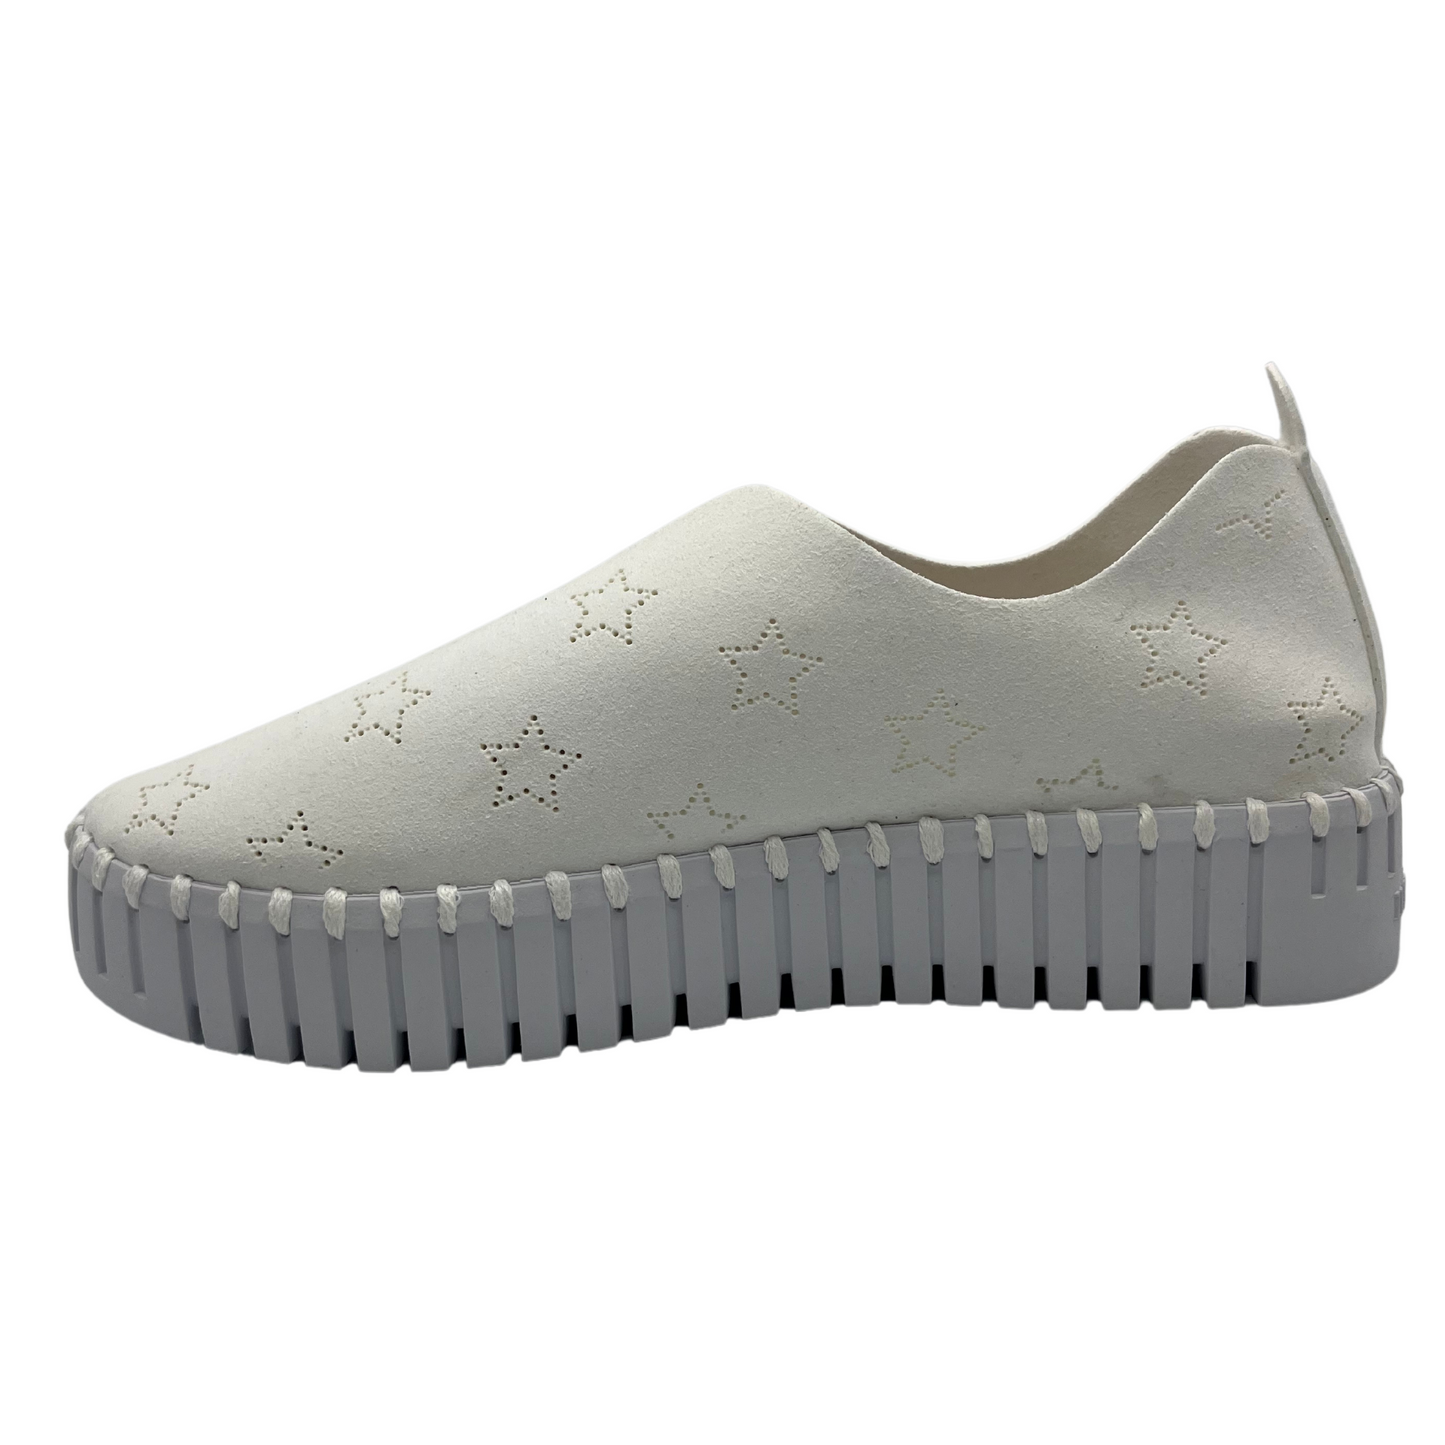 Left facing view of white slip on sneakers with small star cutouts on upper. White rubber platform sole.